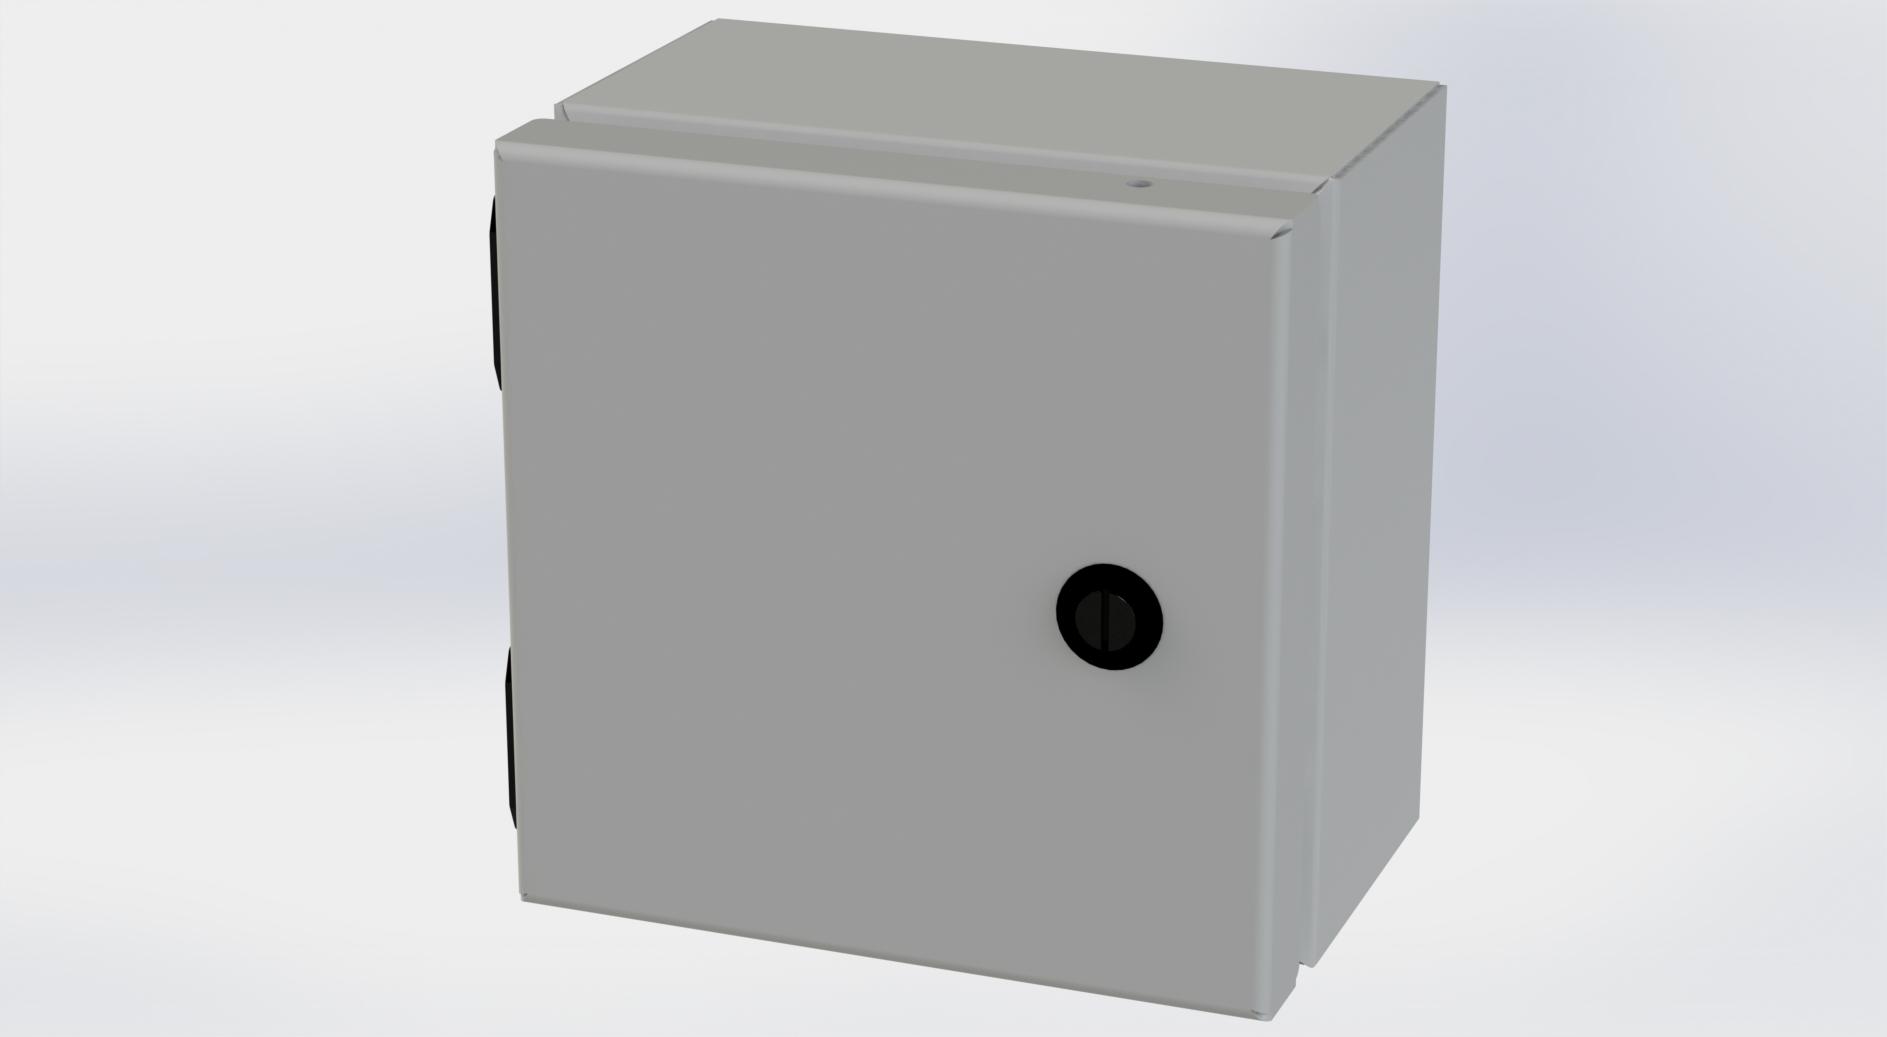 Saginaw Control SCE-606ELJ ELJ Enclosure, Height:6.00", Width:6.00", Depth:4.00", ANSI-61 gray powder coating inside and out. Optional sub-panels are powder coated white.